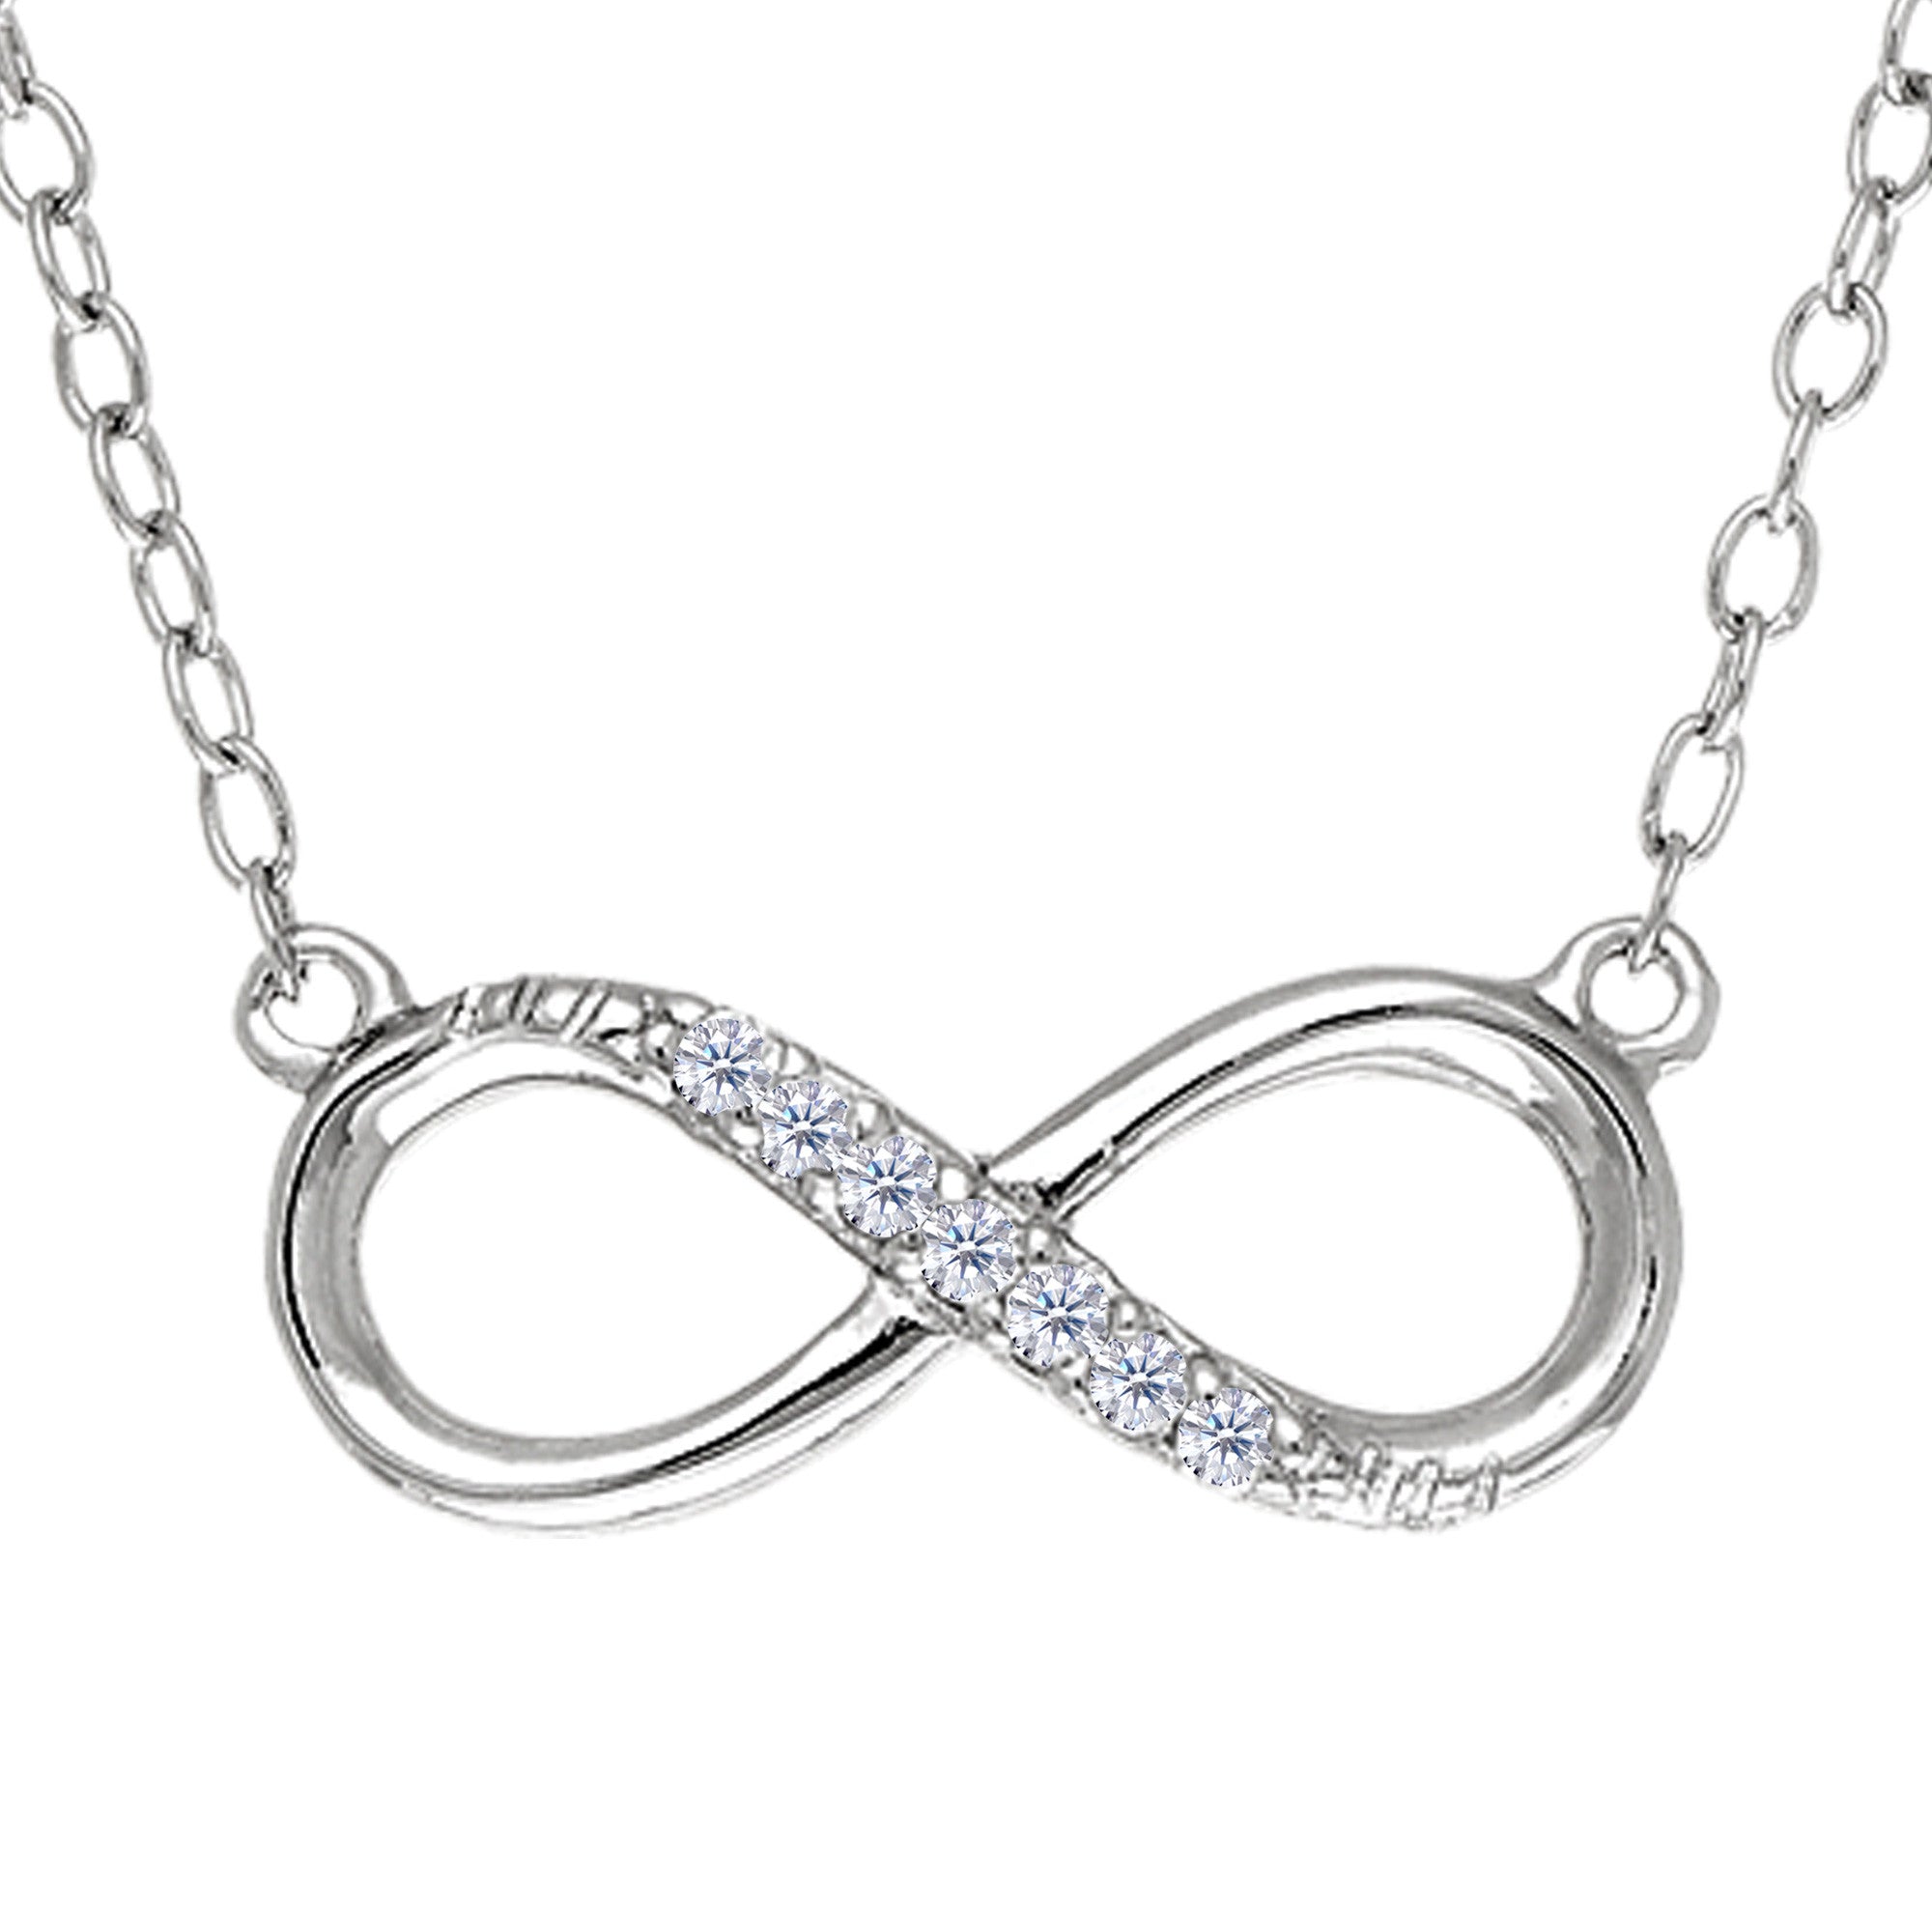 Infinity Sign Link With Cz Necklace In Rhodium Plated Sterling Silver - 18 Inches - JewelryAffairs
 - 1